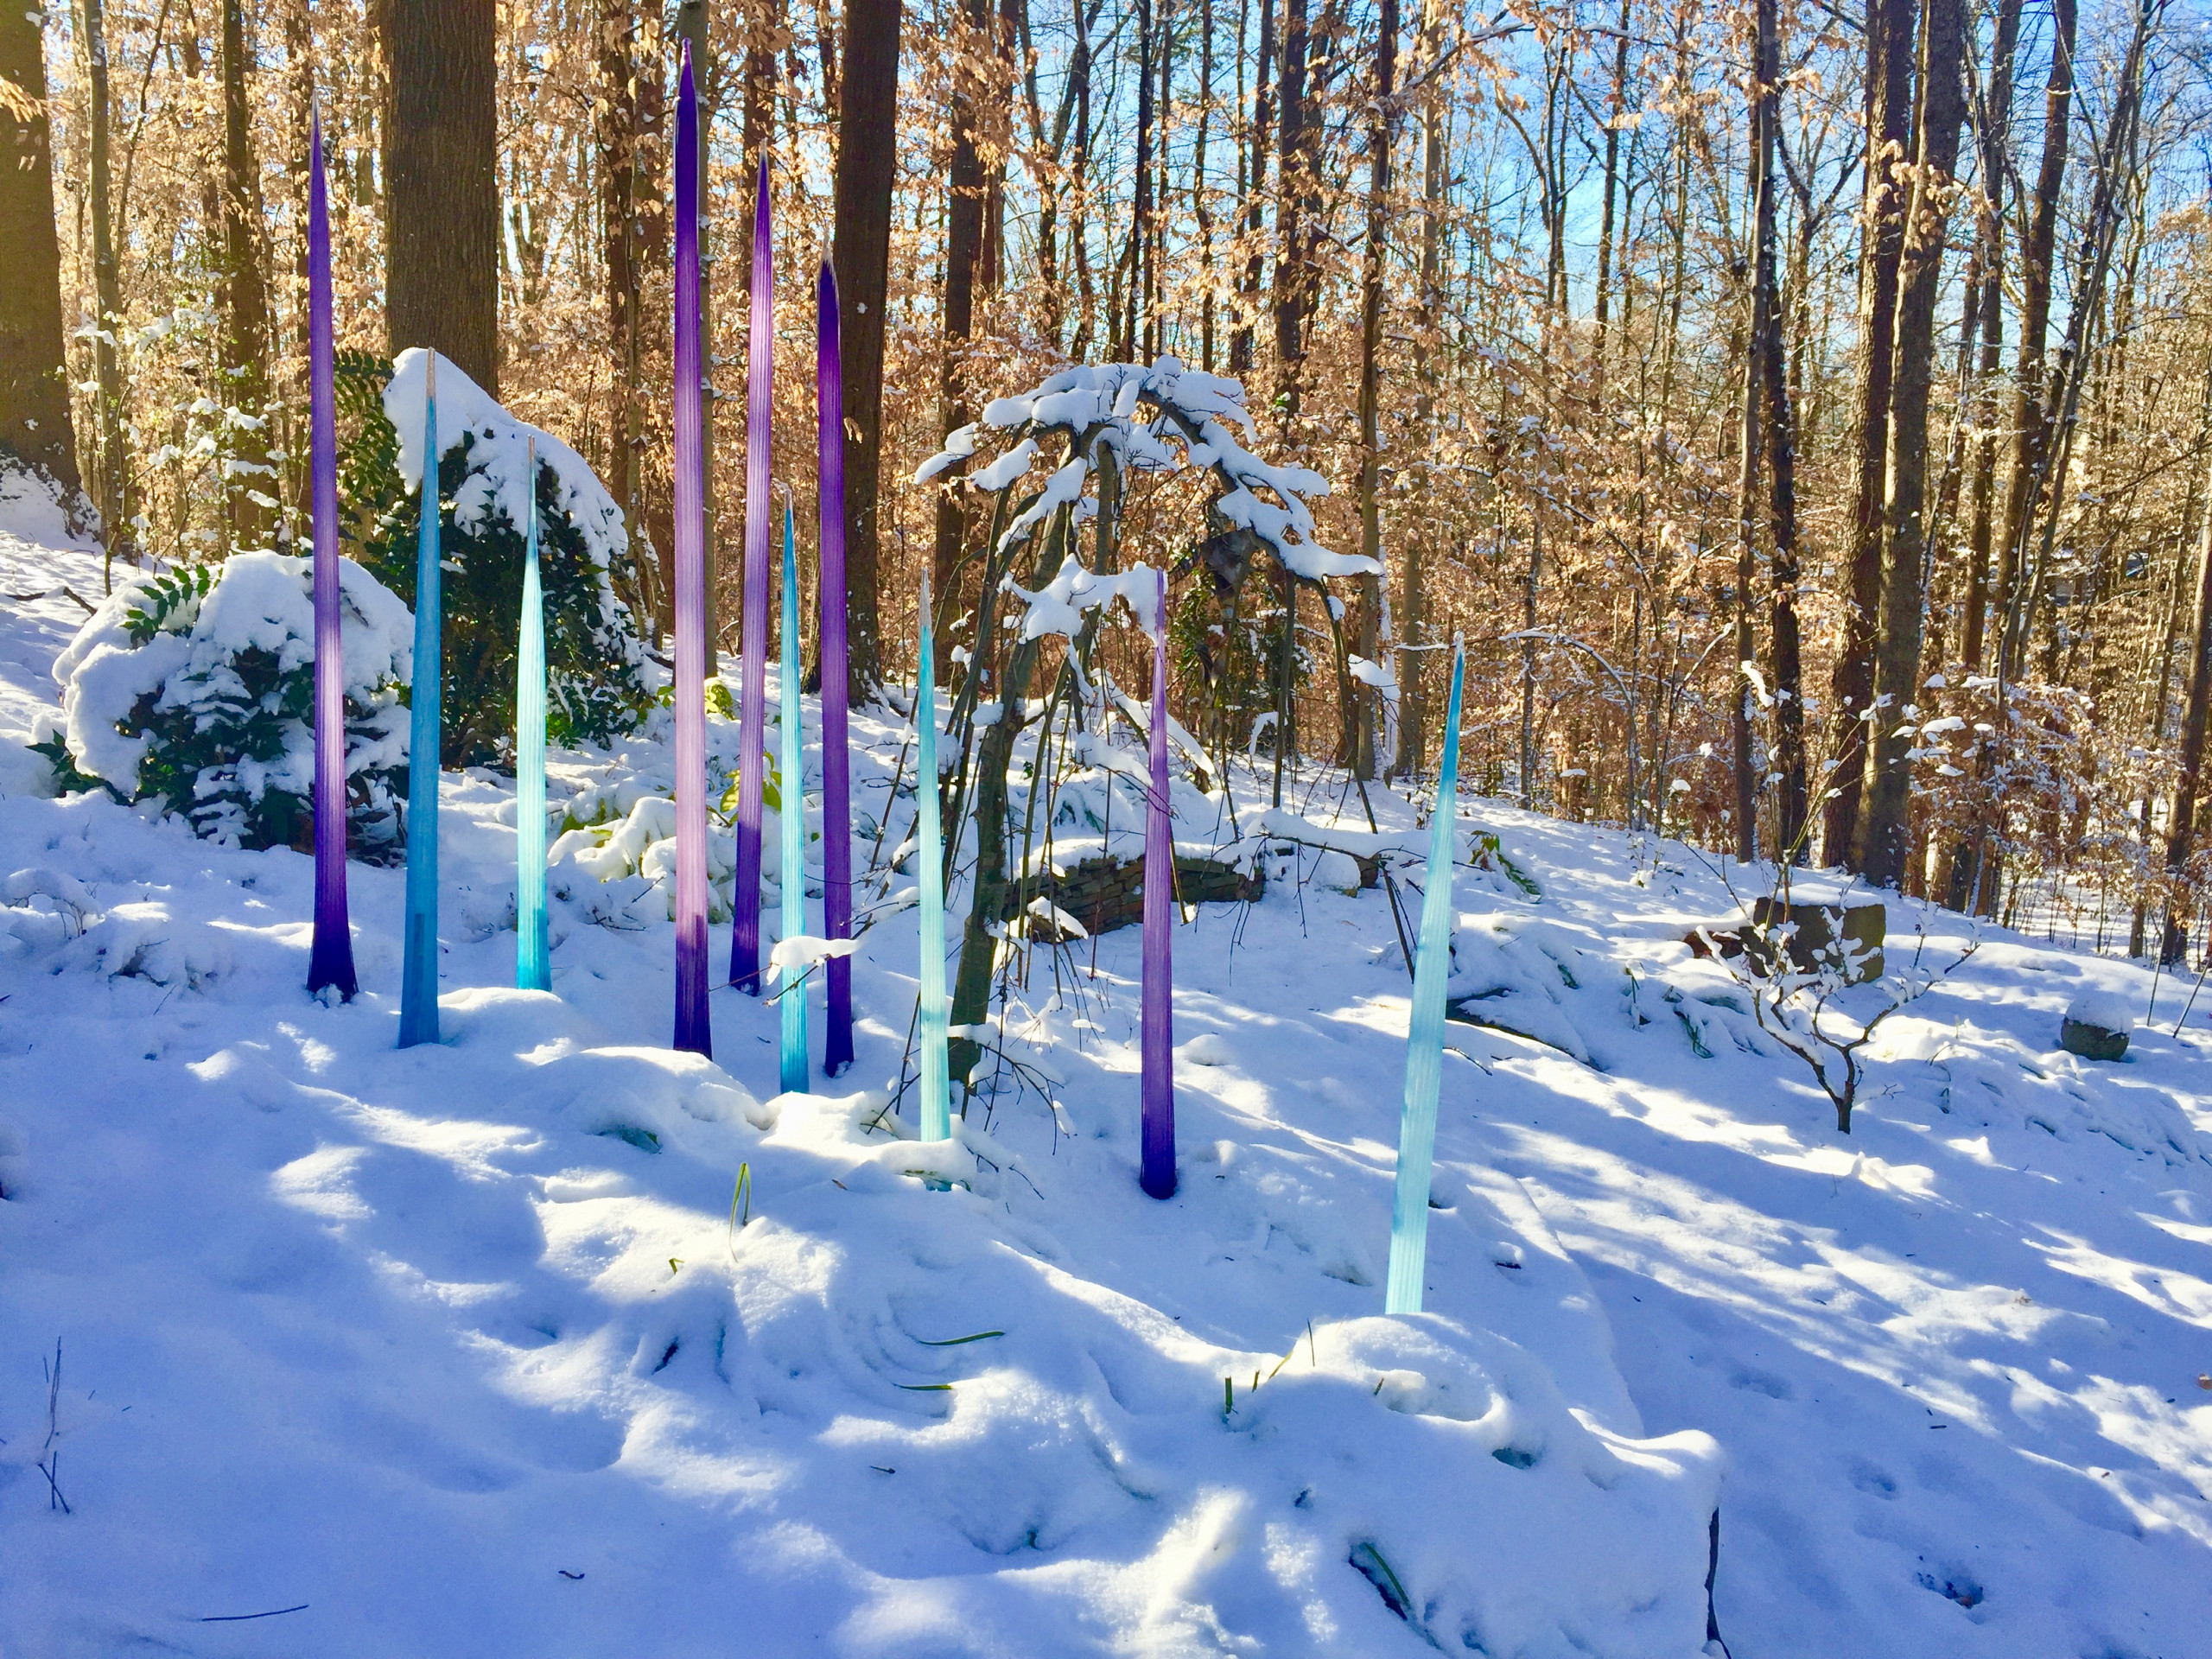 Glass spears in the snow.